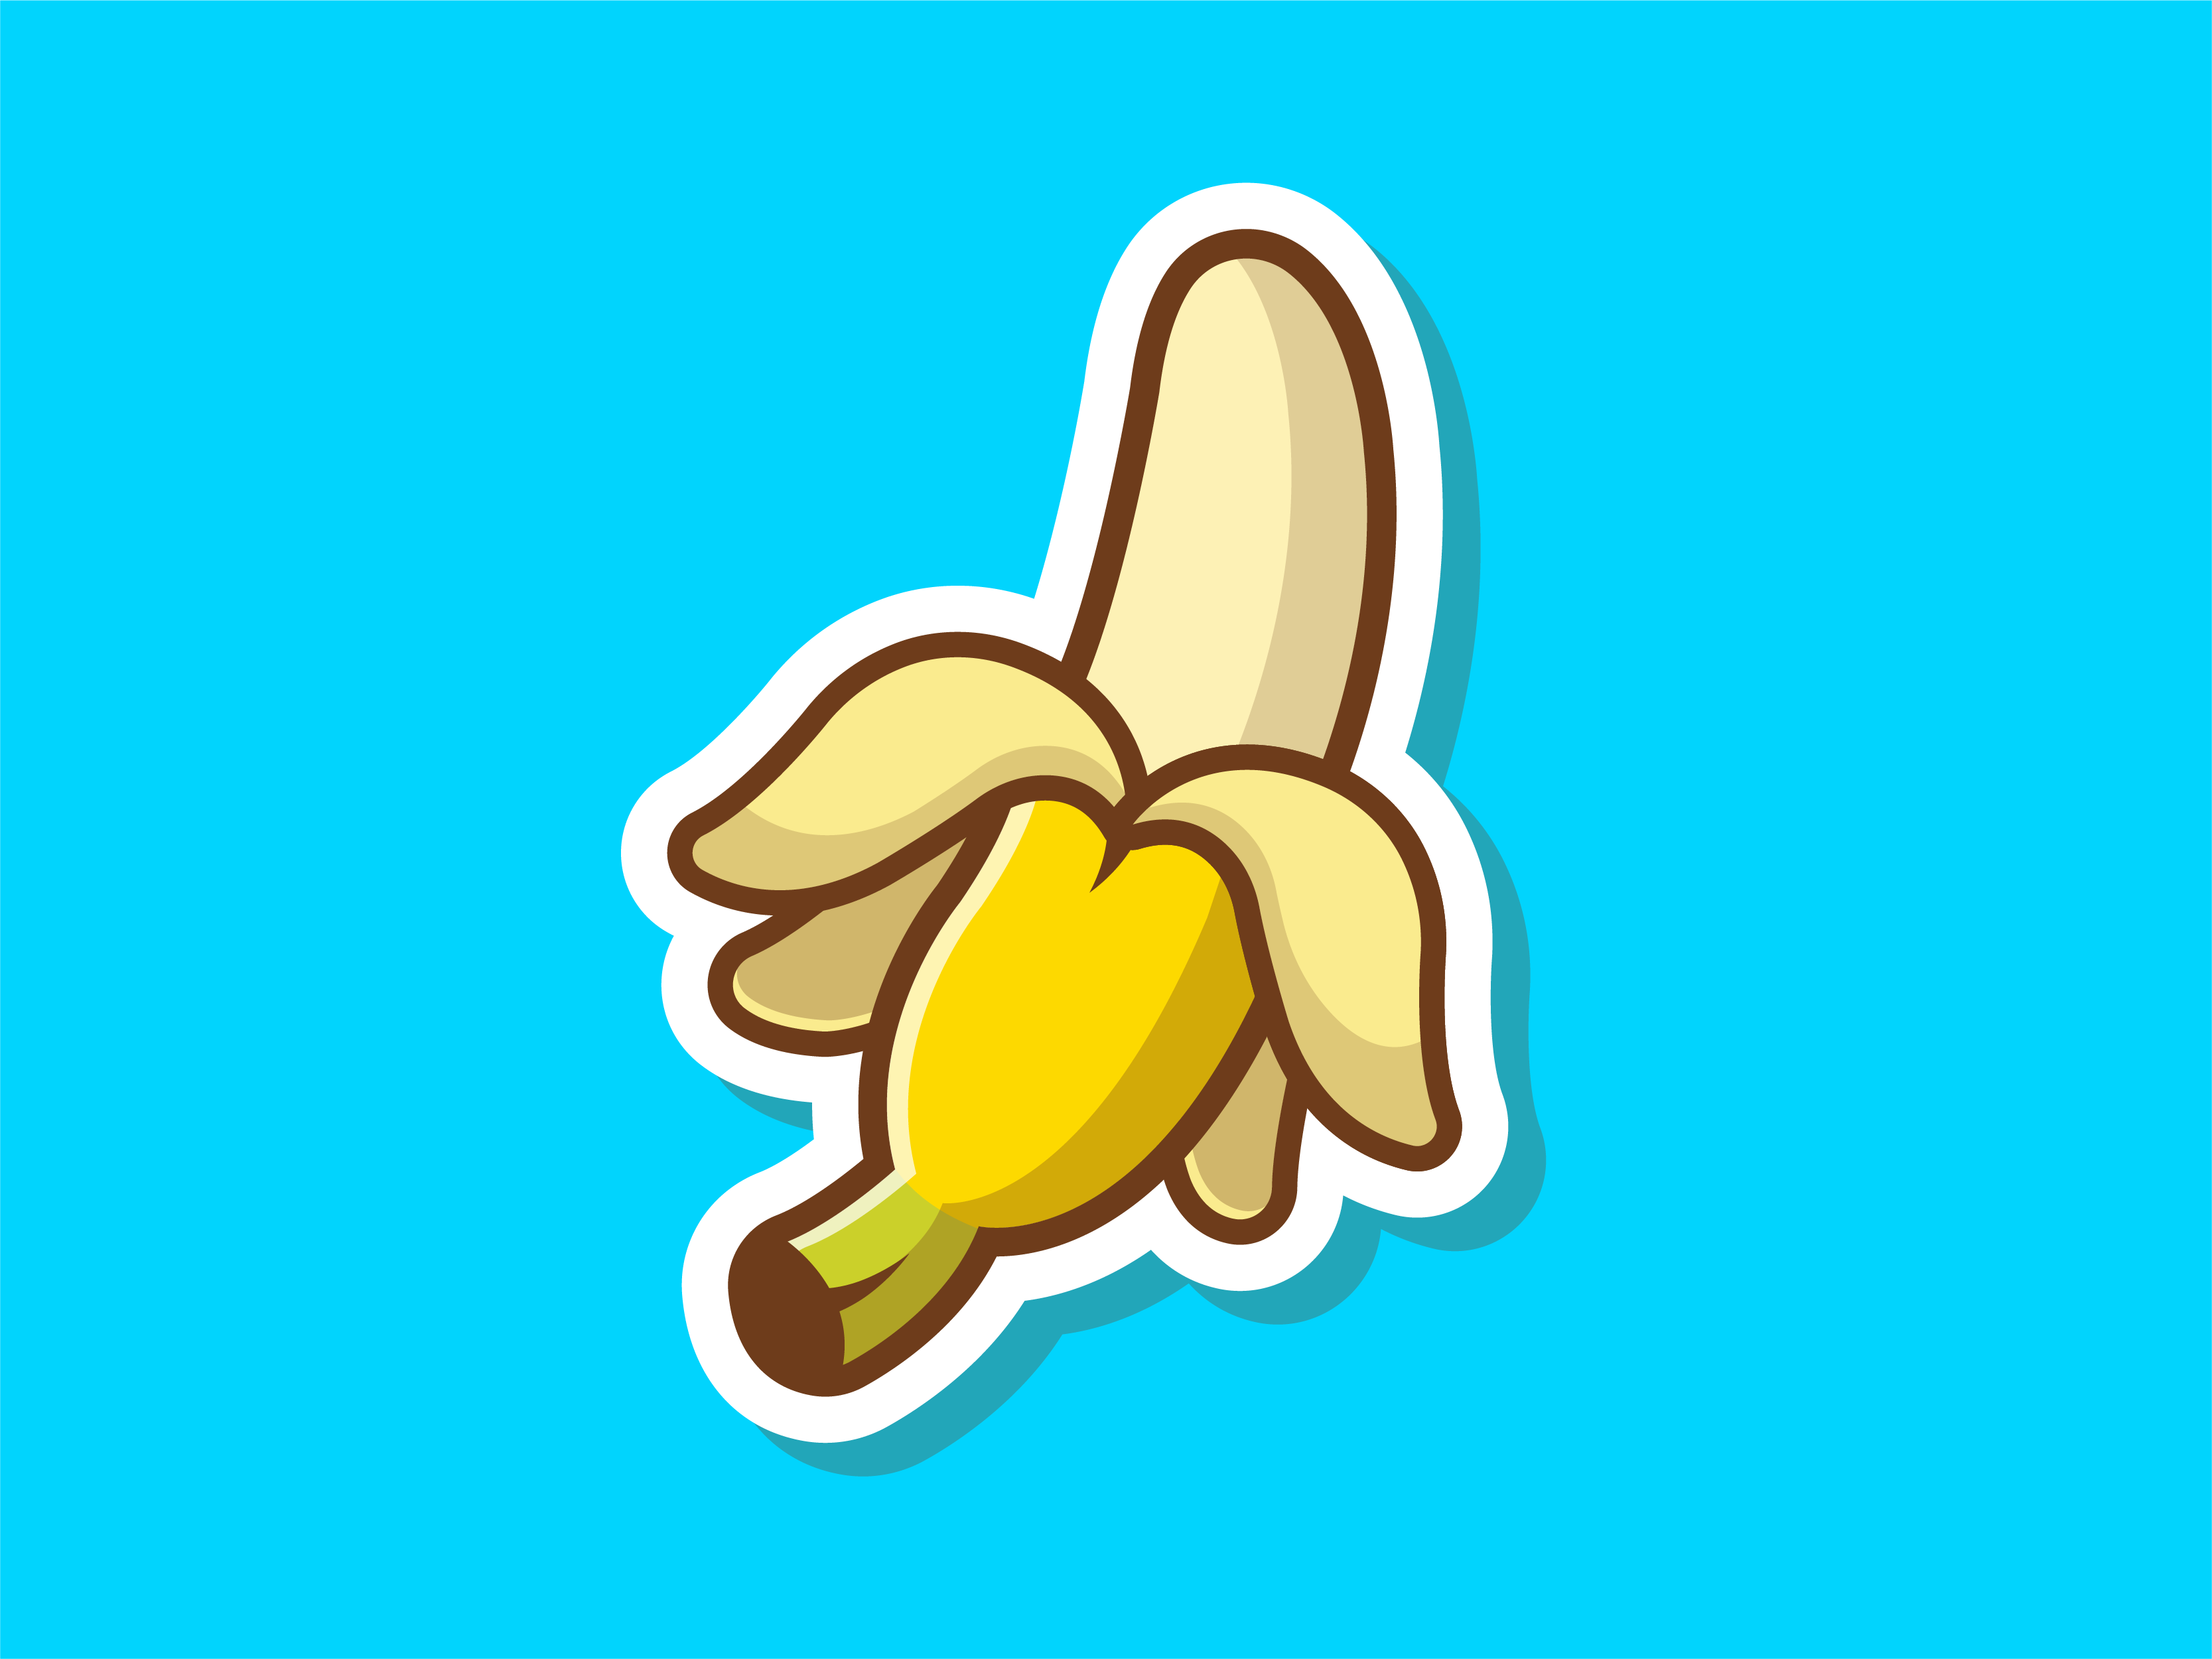 Dribbble - banana-05.png by catalyst